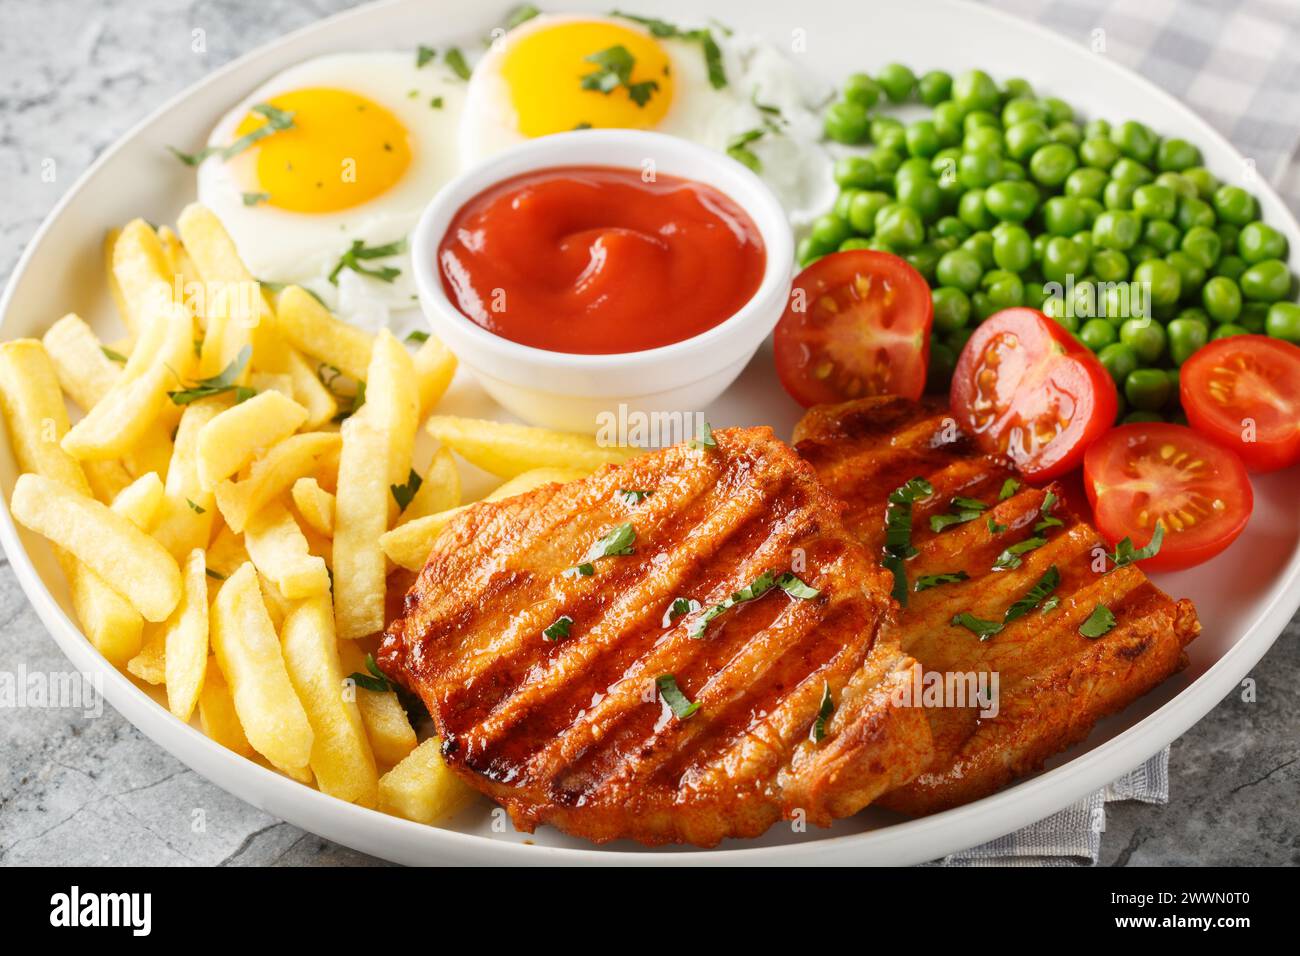 Fried pork loin steak served with French fries, fied eggs, green pea and fresh tomato closeup on the plate on the table. Horizontal Stock Photo